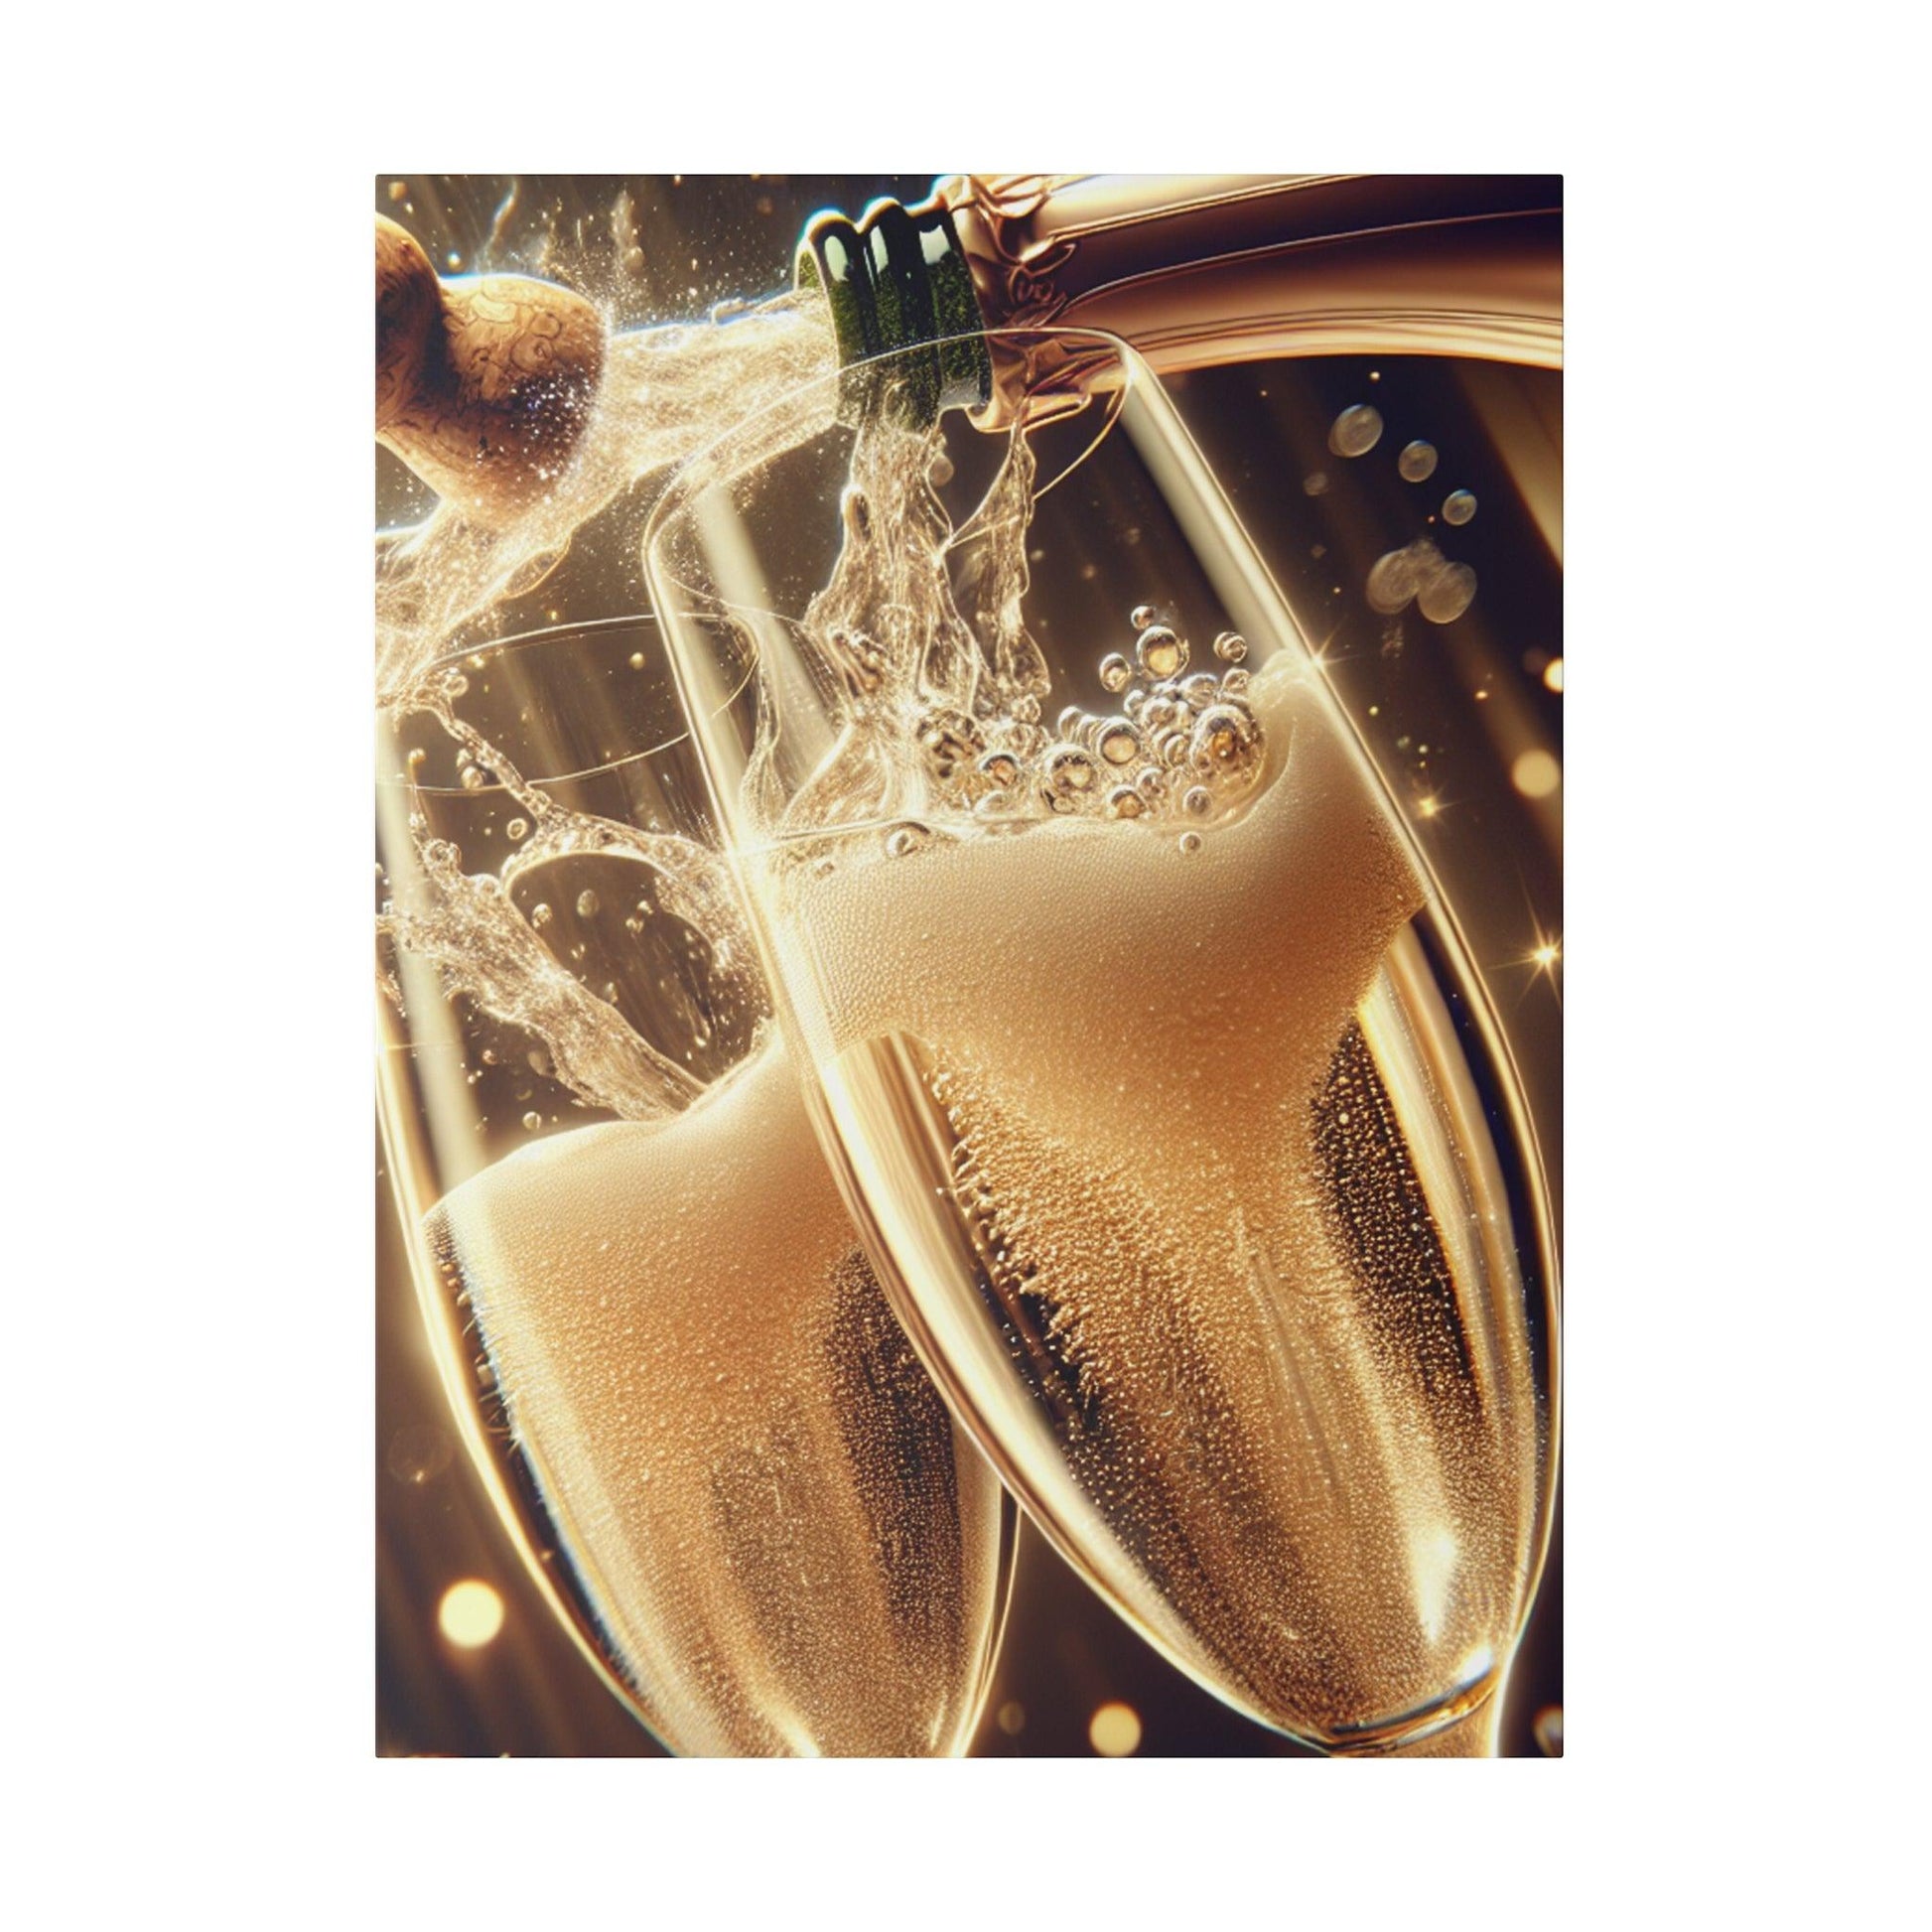 "Champagne Reverie: A Symphony of Bubbly Elation" - The Alice Gallery